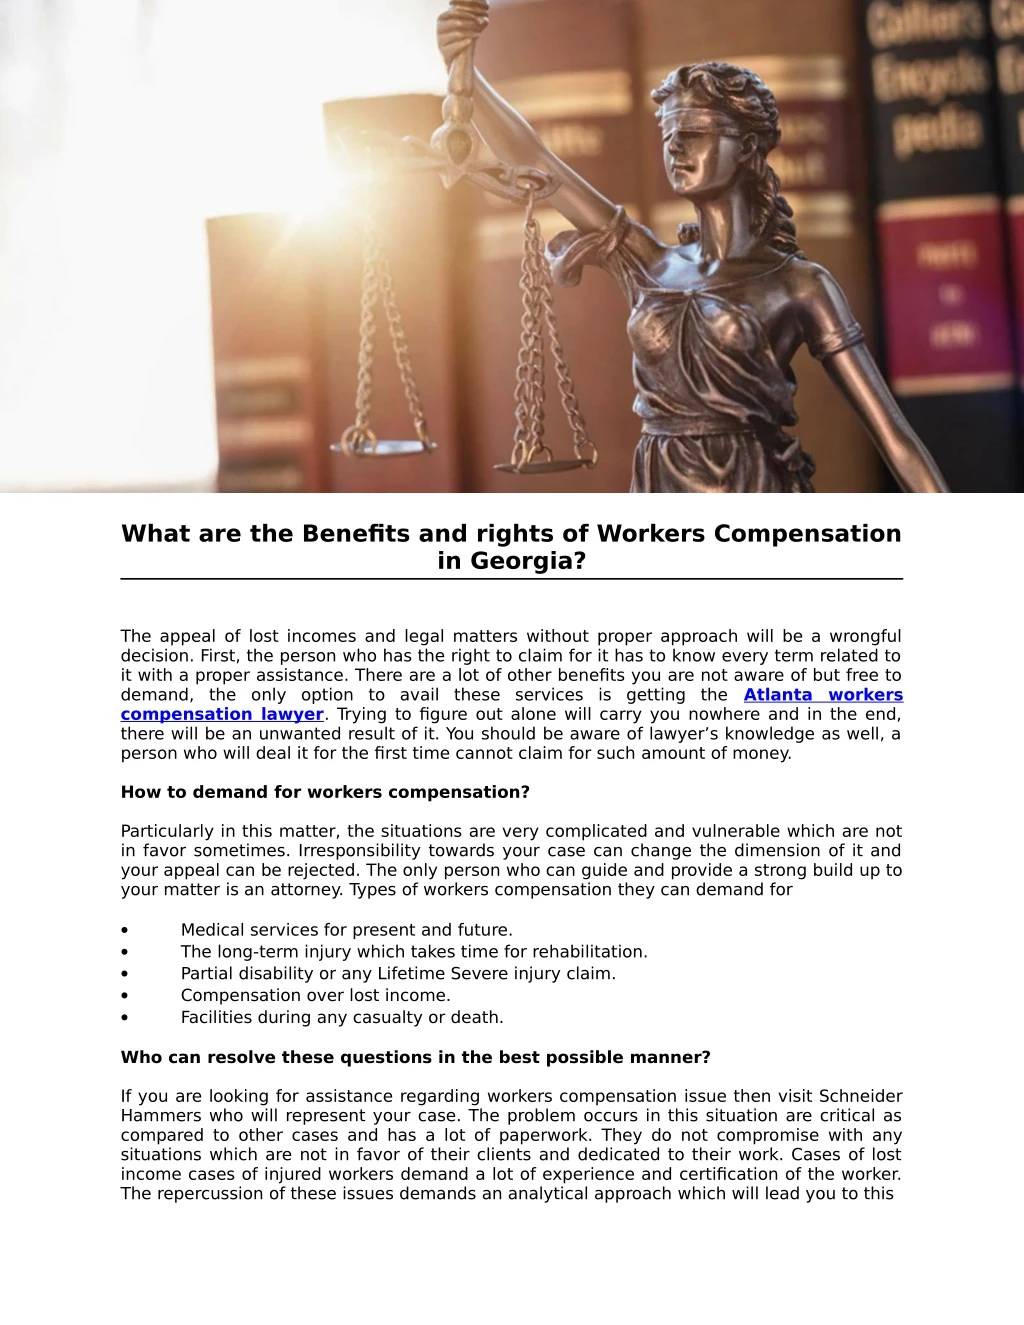 what are the benefits and rights of workers